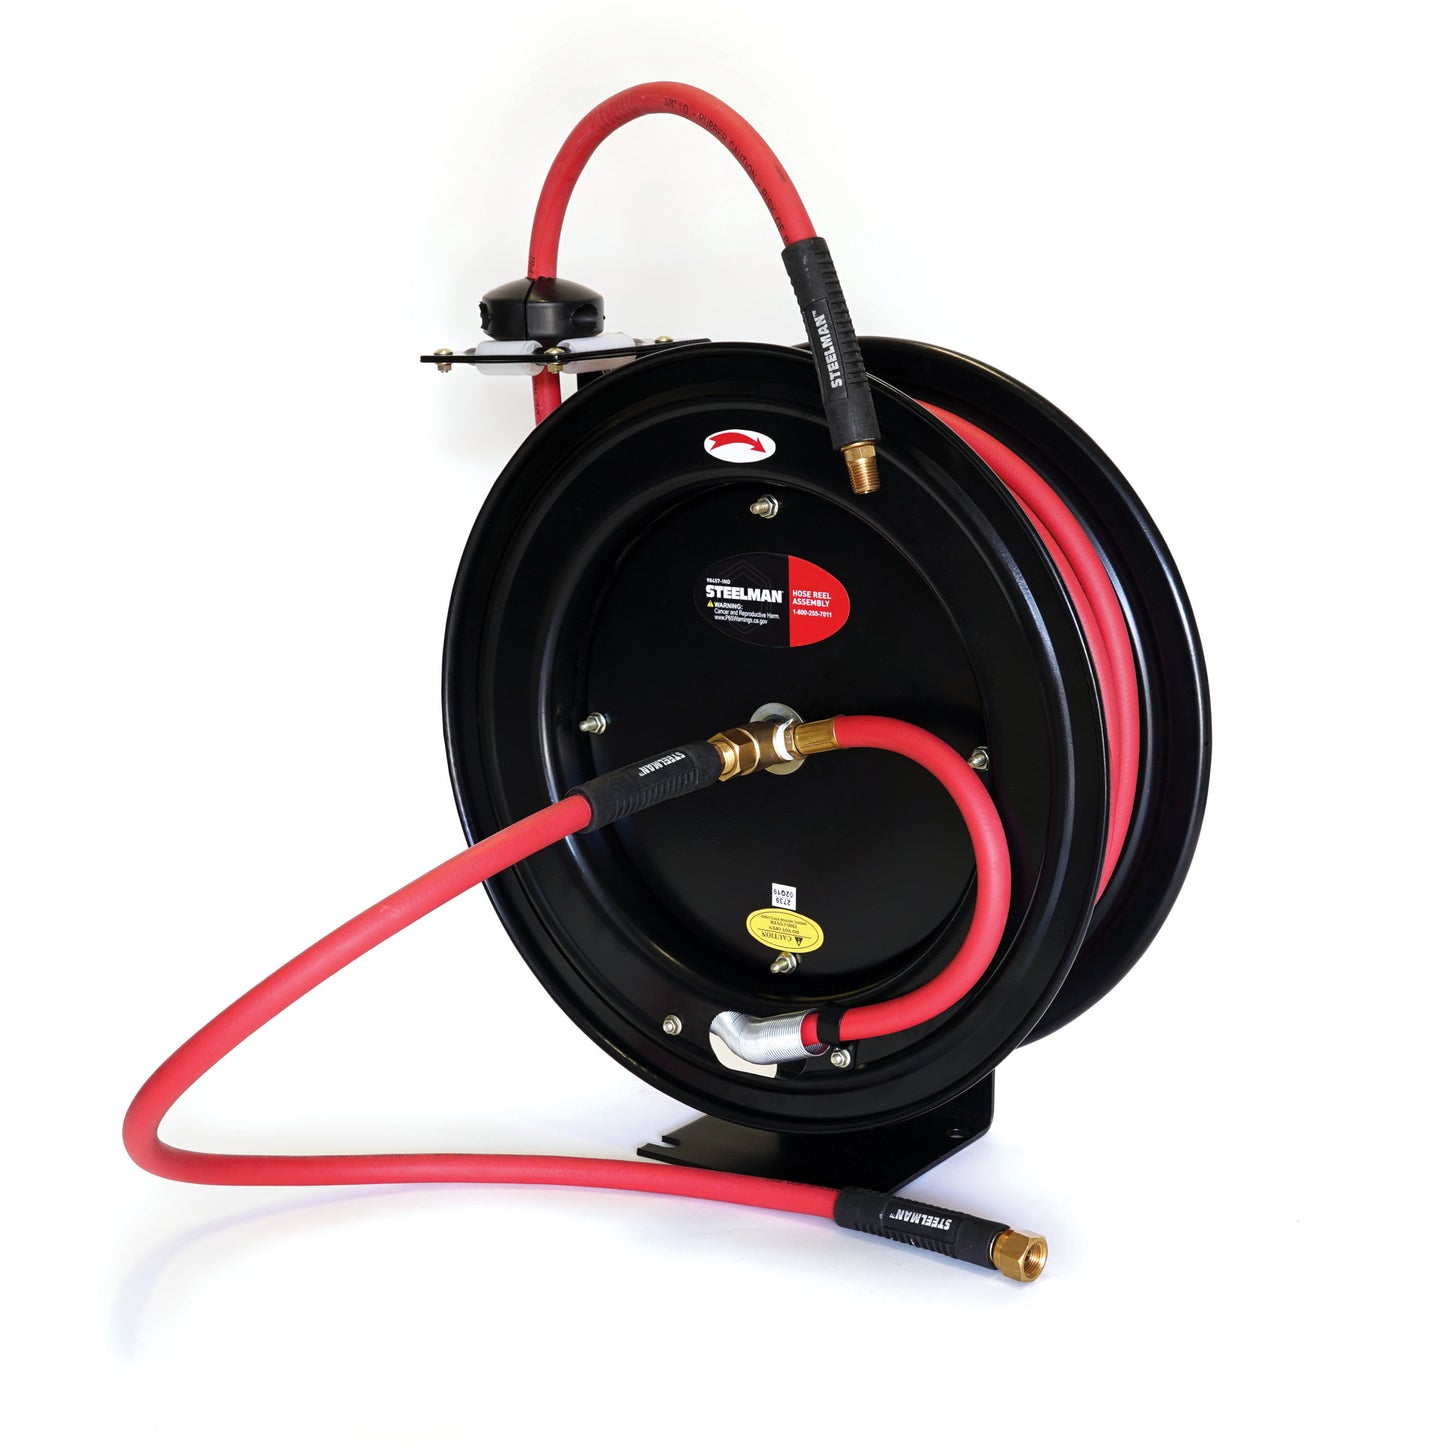 Enclosed Spring Pneumatic Hose Reel with 35-Foot Hose